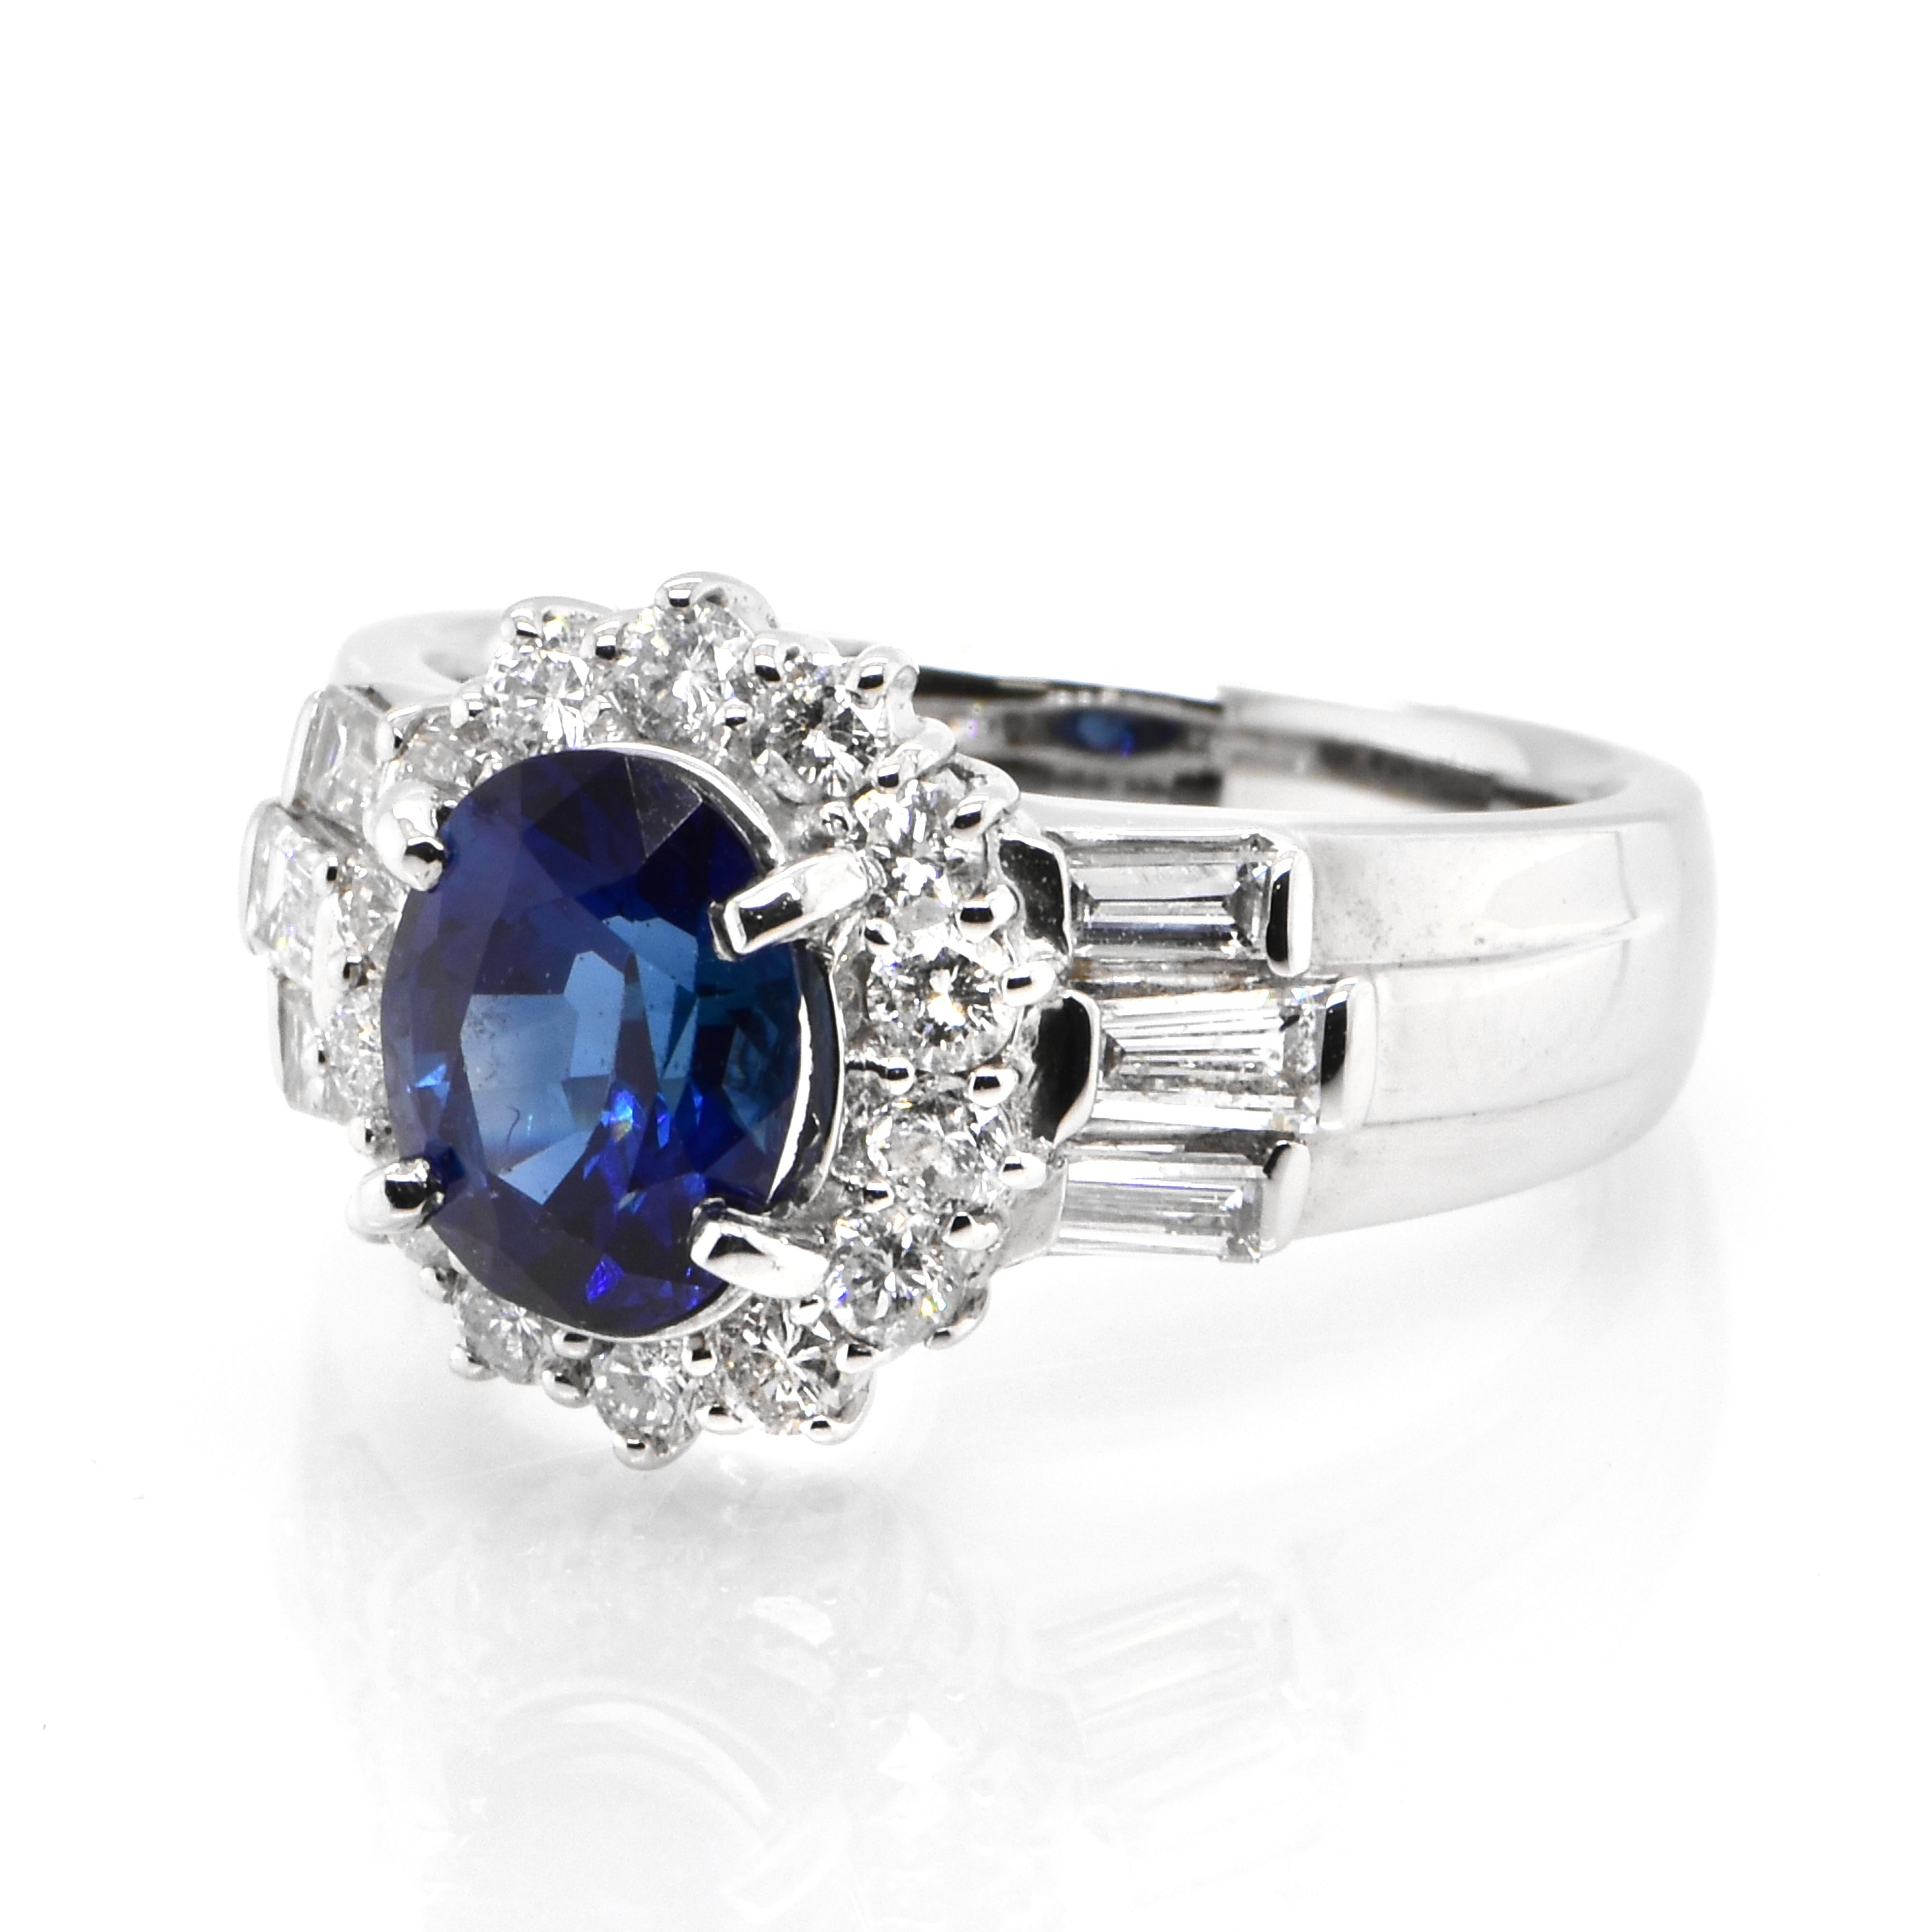 A beautiful ring featuring 1.522 Carat Natural Royal Blue Sapphire and 0.81 Carats Diamond Accents set in Platinum. Sapphires have extraordinary durability - they excel in hardness as well as toughness and durability making them very popular in